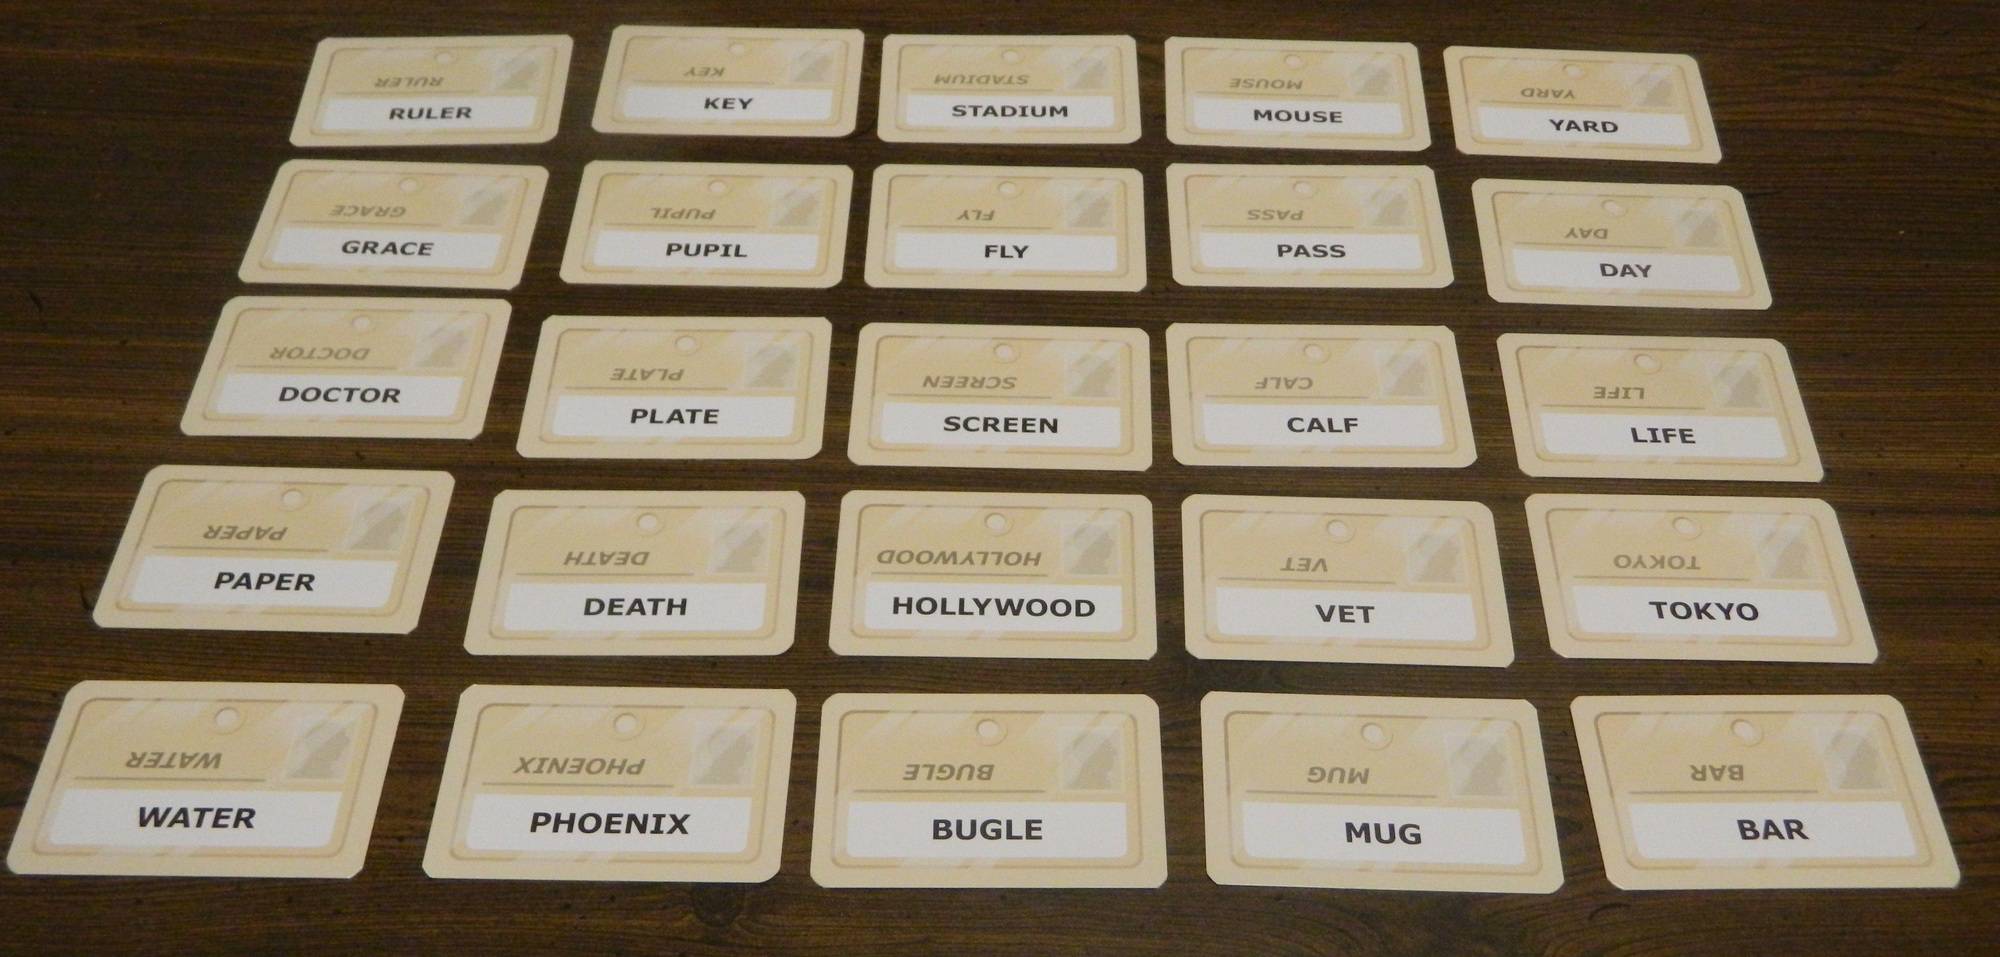 Codenames Board Game Review And Rules Geeky Hobbies